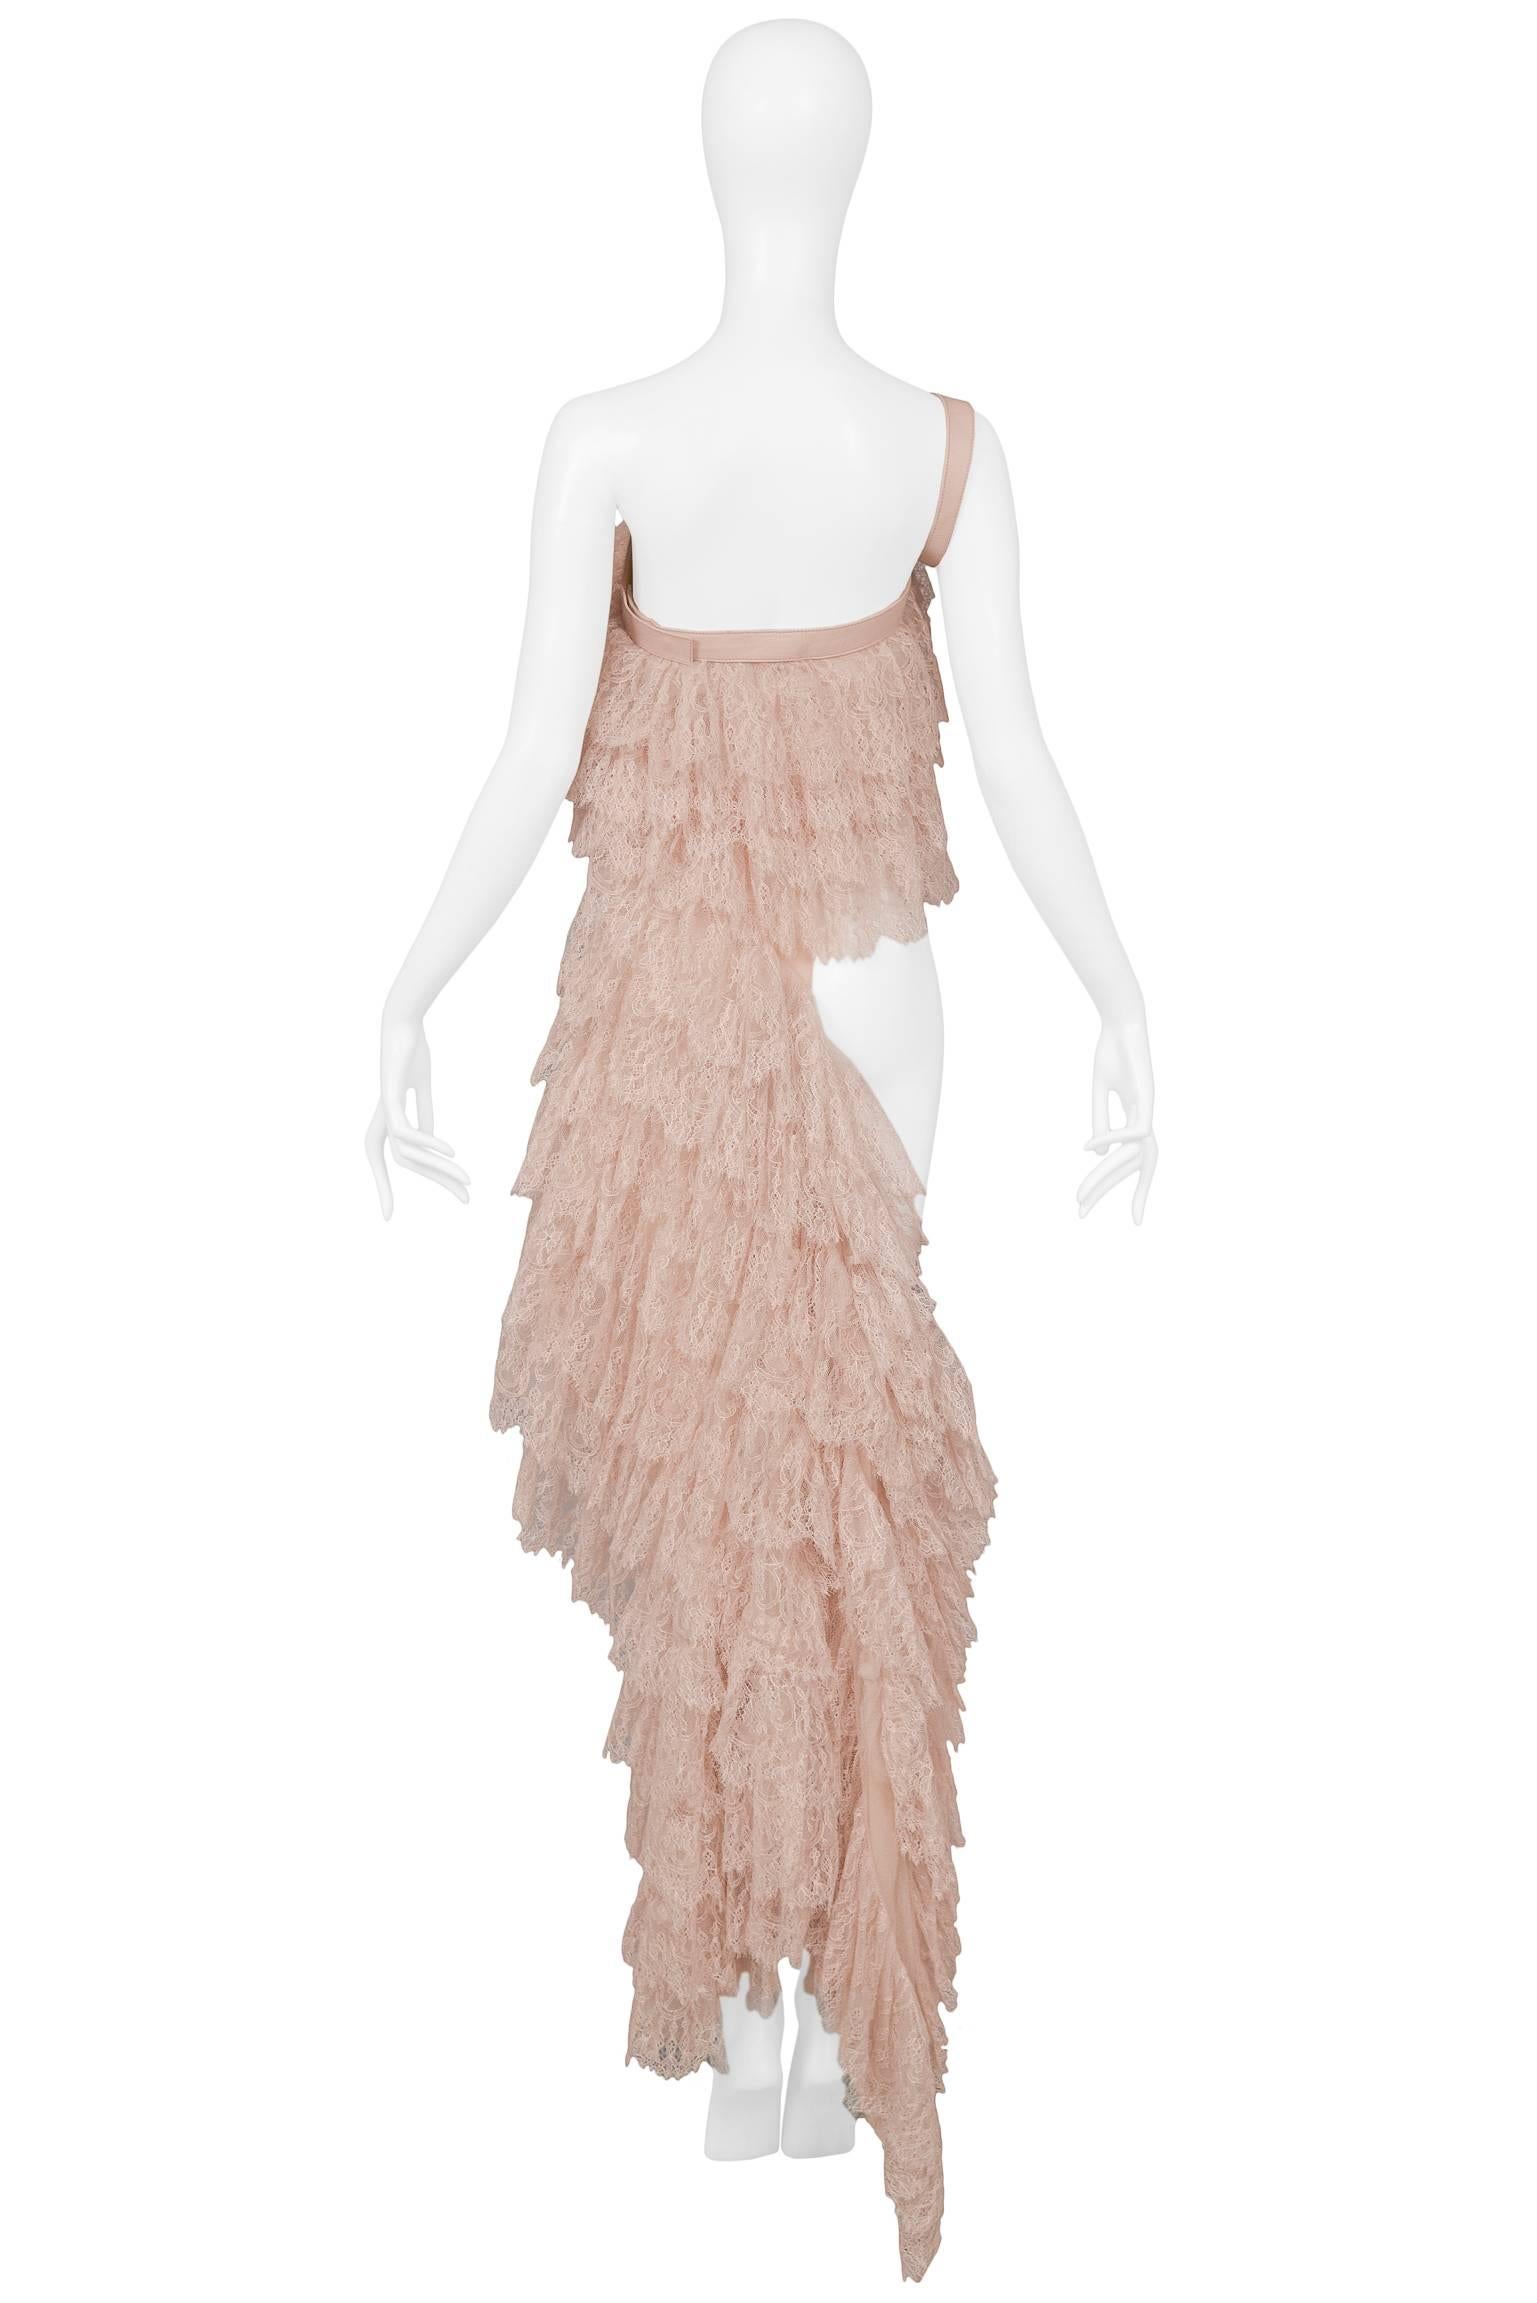 Alexander McQueen Pink Lace Asymmetrical Ruffle Ball Gown Top w Leather 2007  3